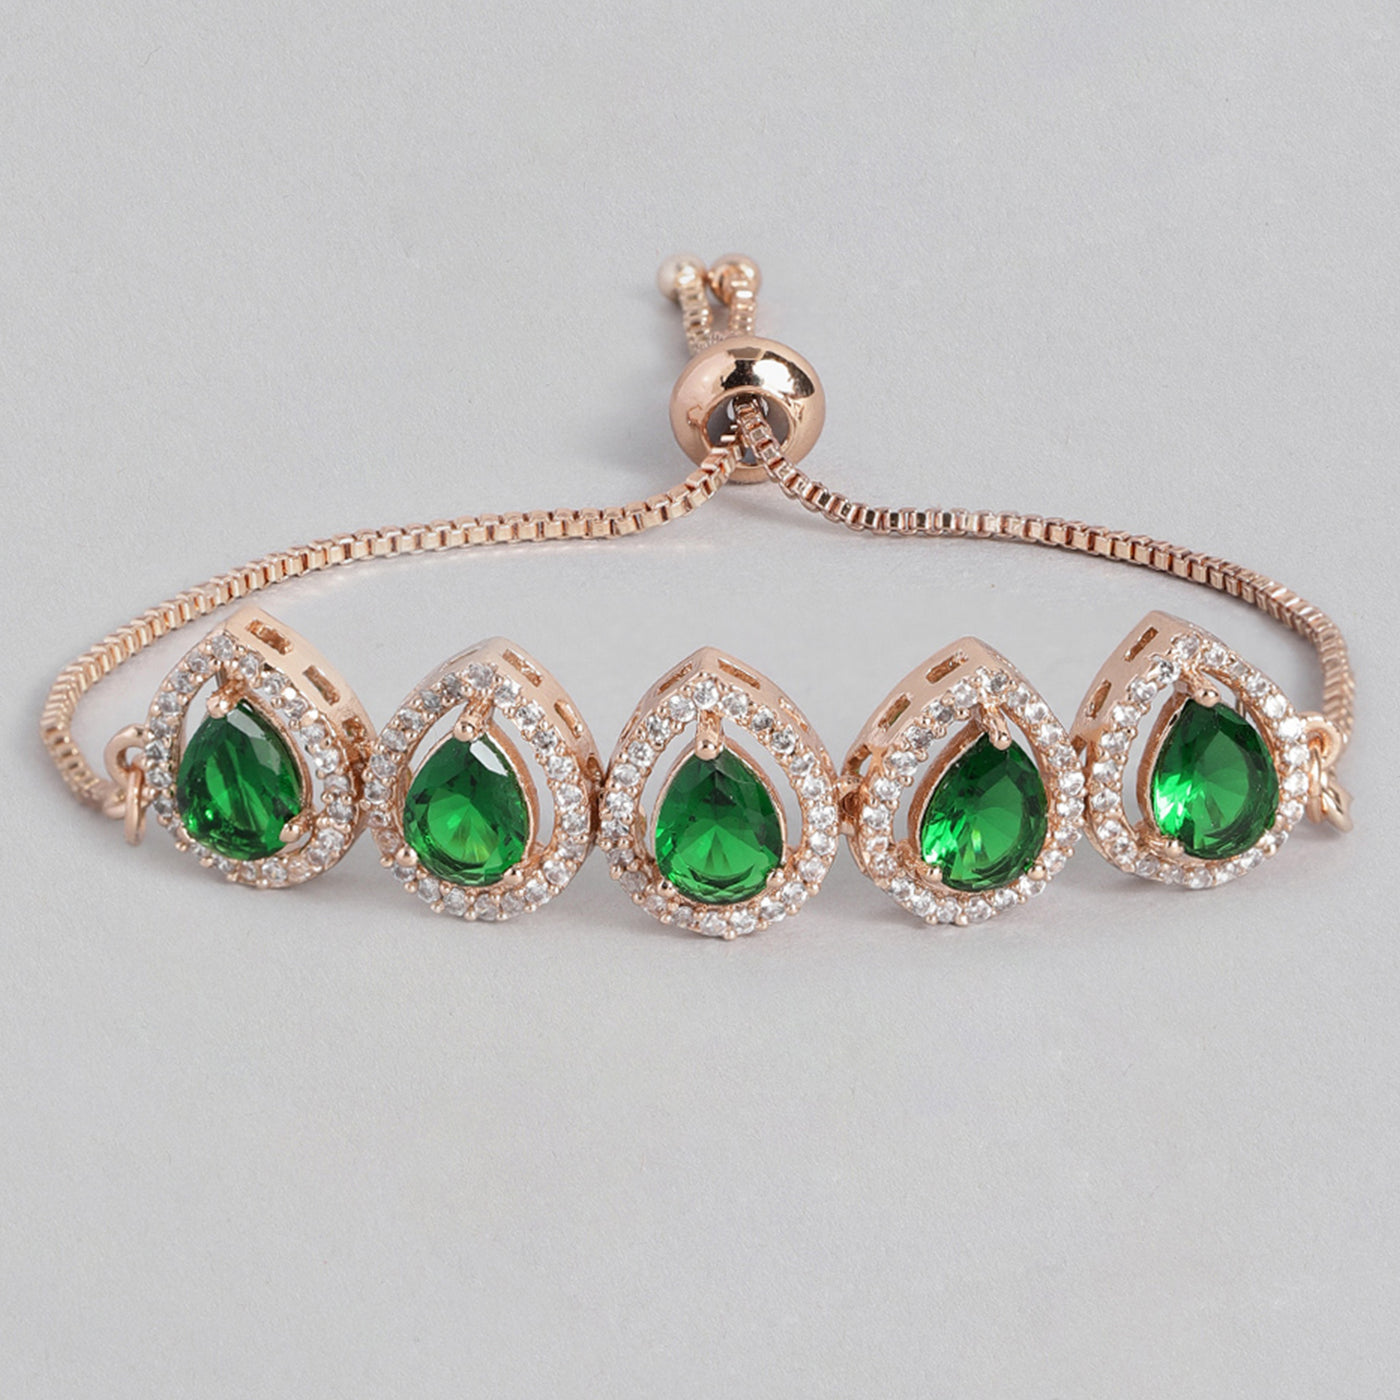 Estele Rose Gold Plated CZ Precious Pears Bracelet with Emerald Crystals for Women